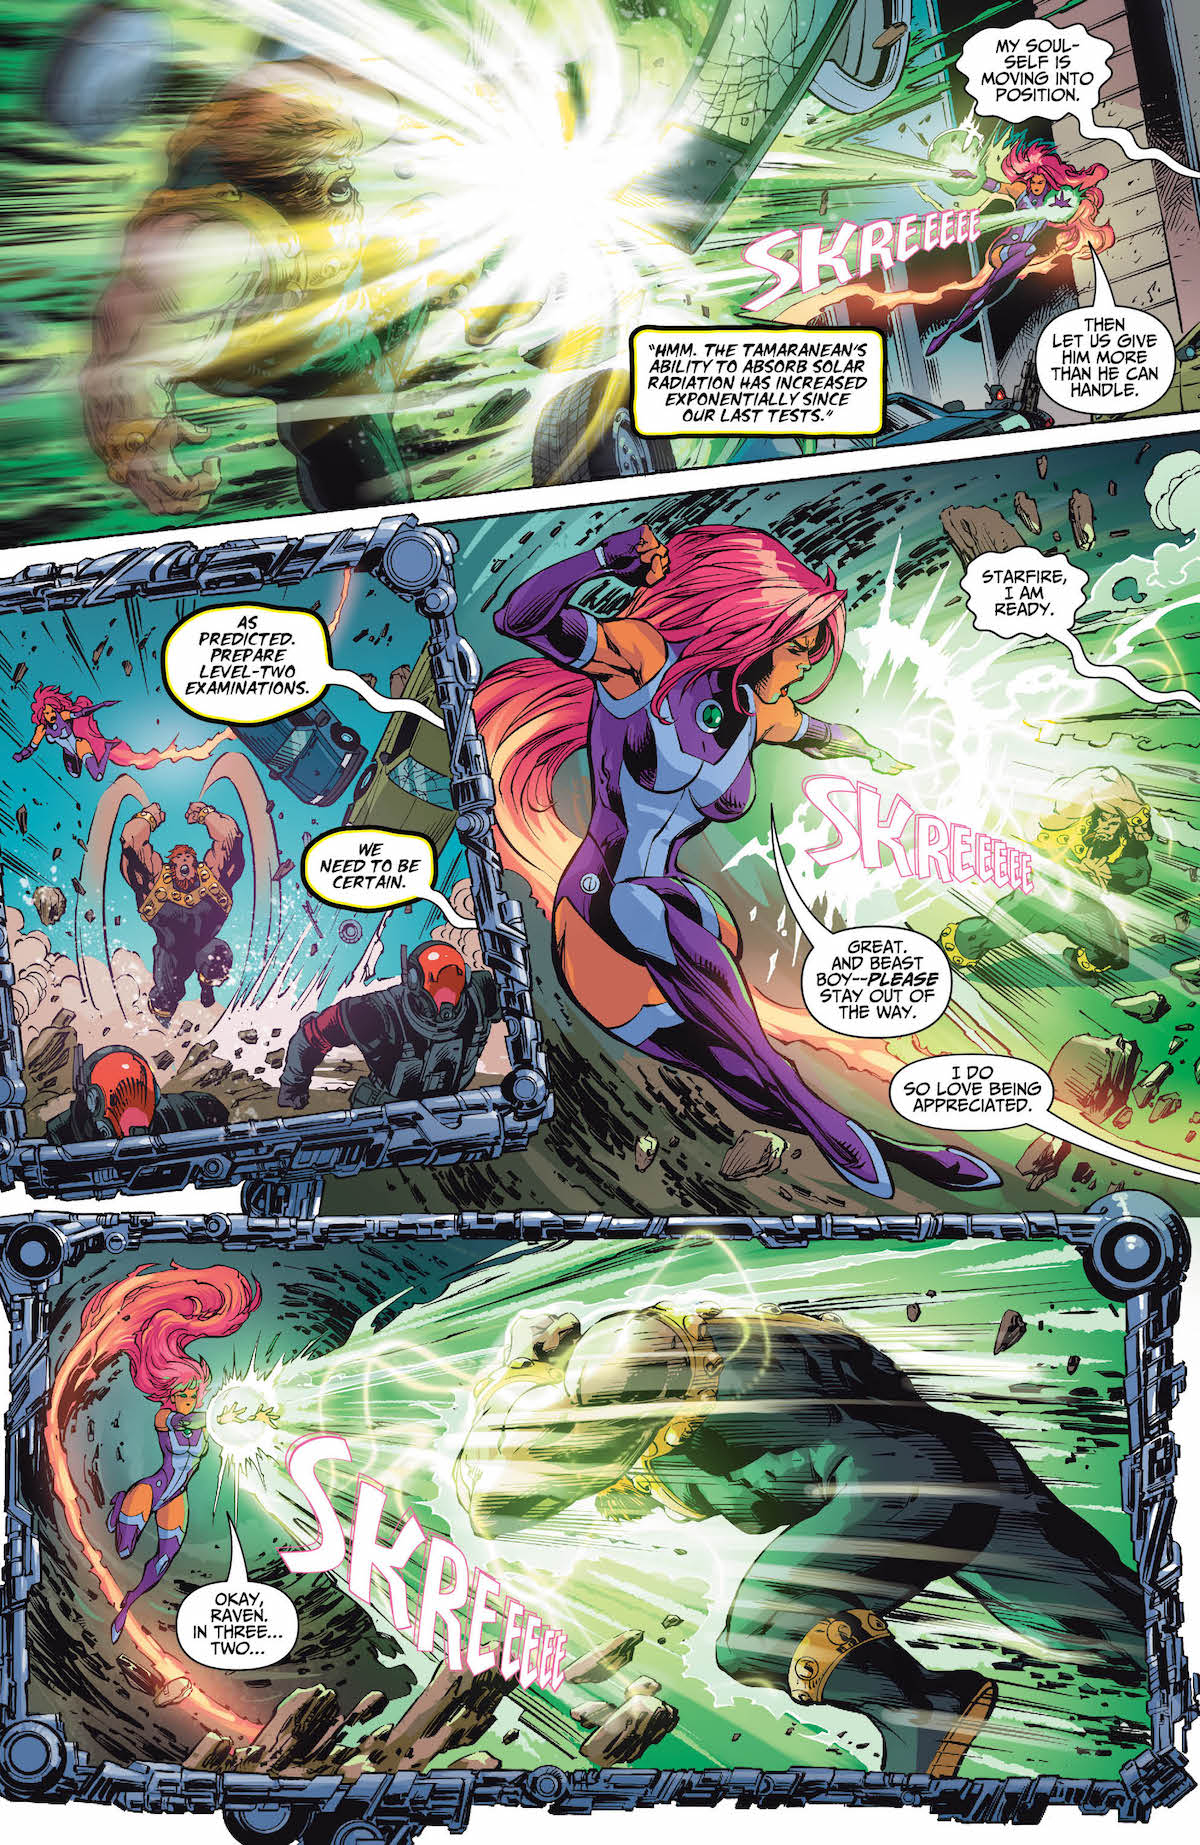 Teen Titans #16 page 2 Starfire